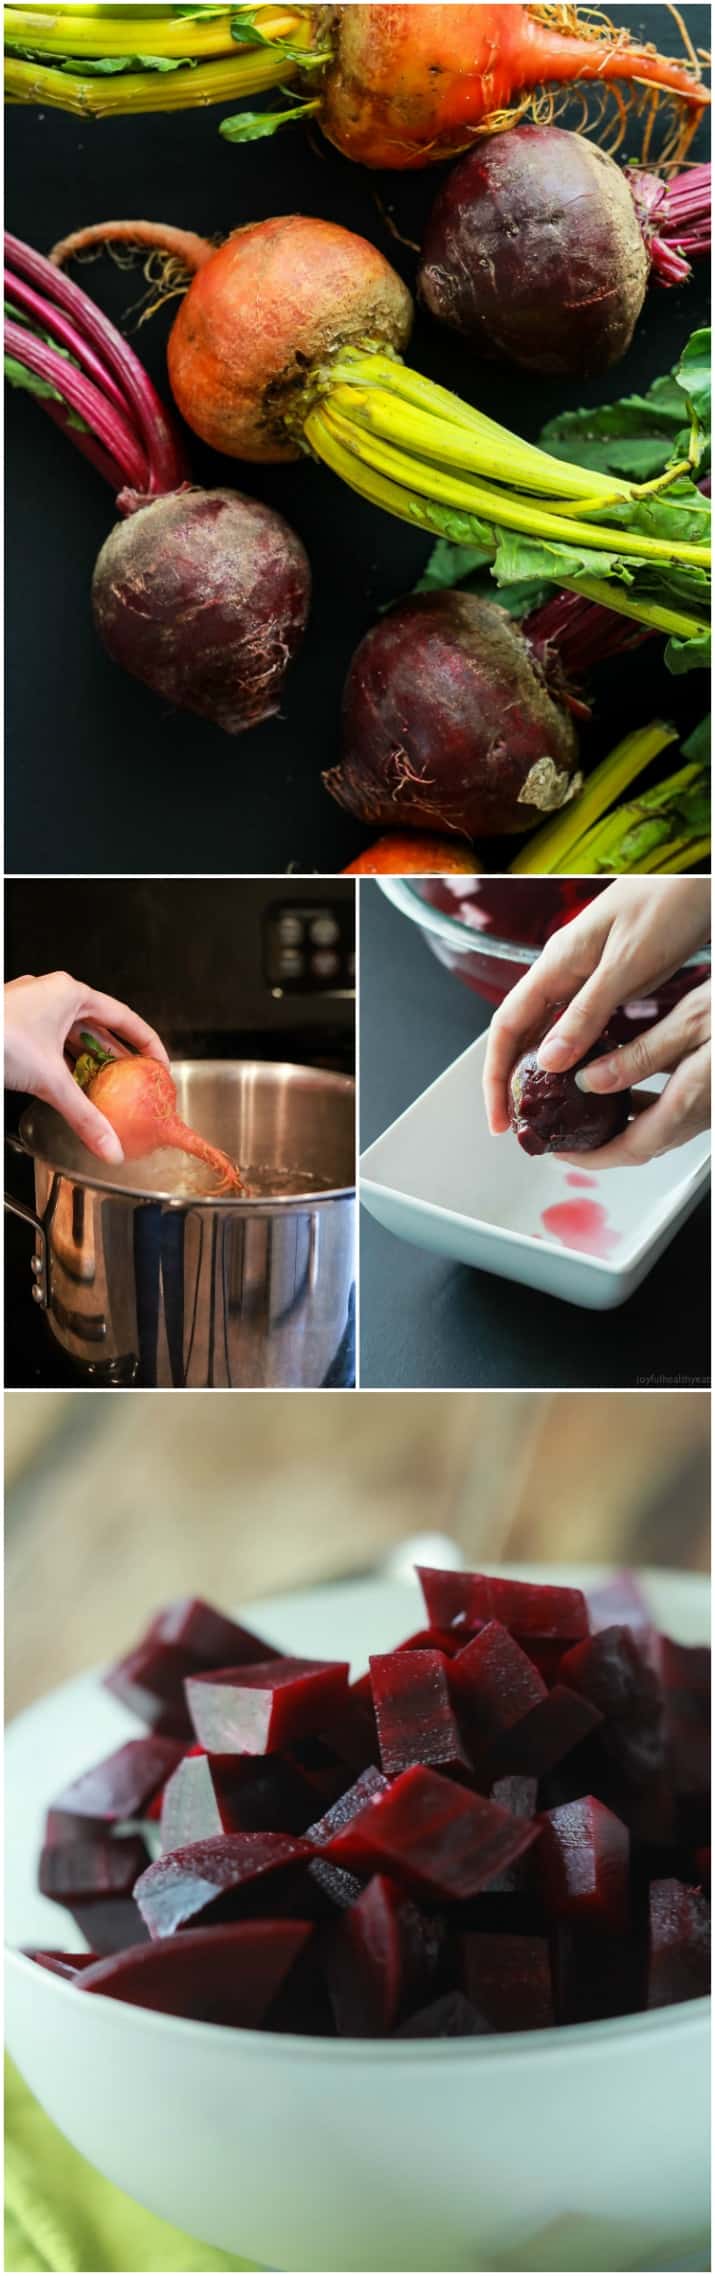 Easy step by step tutorial on how to cook beets. Great for smoothies, side dishes, salads, or just snacking. Full of nutrients and antioxidants! | gluten free recipes | healthy eating